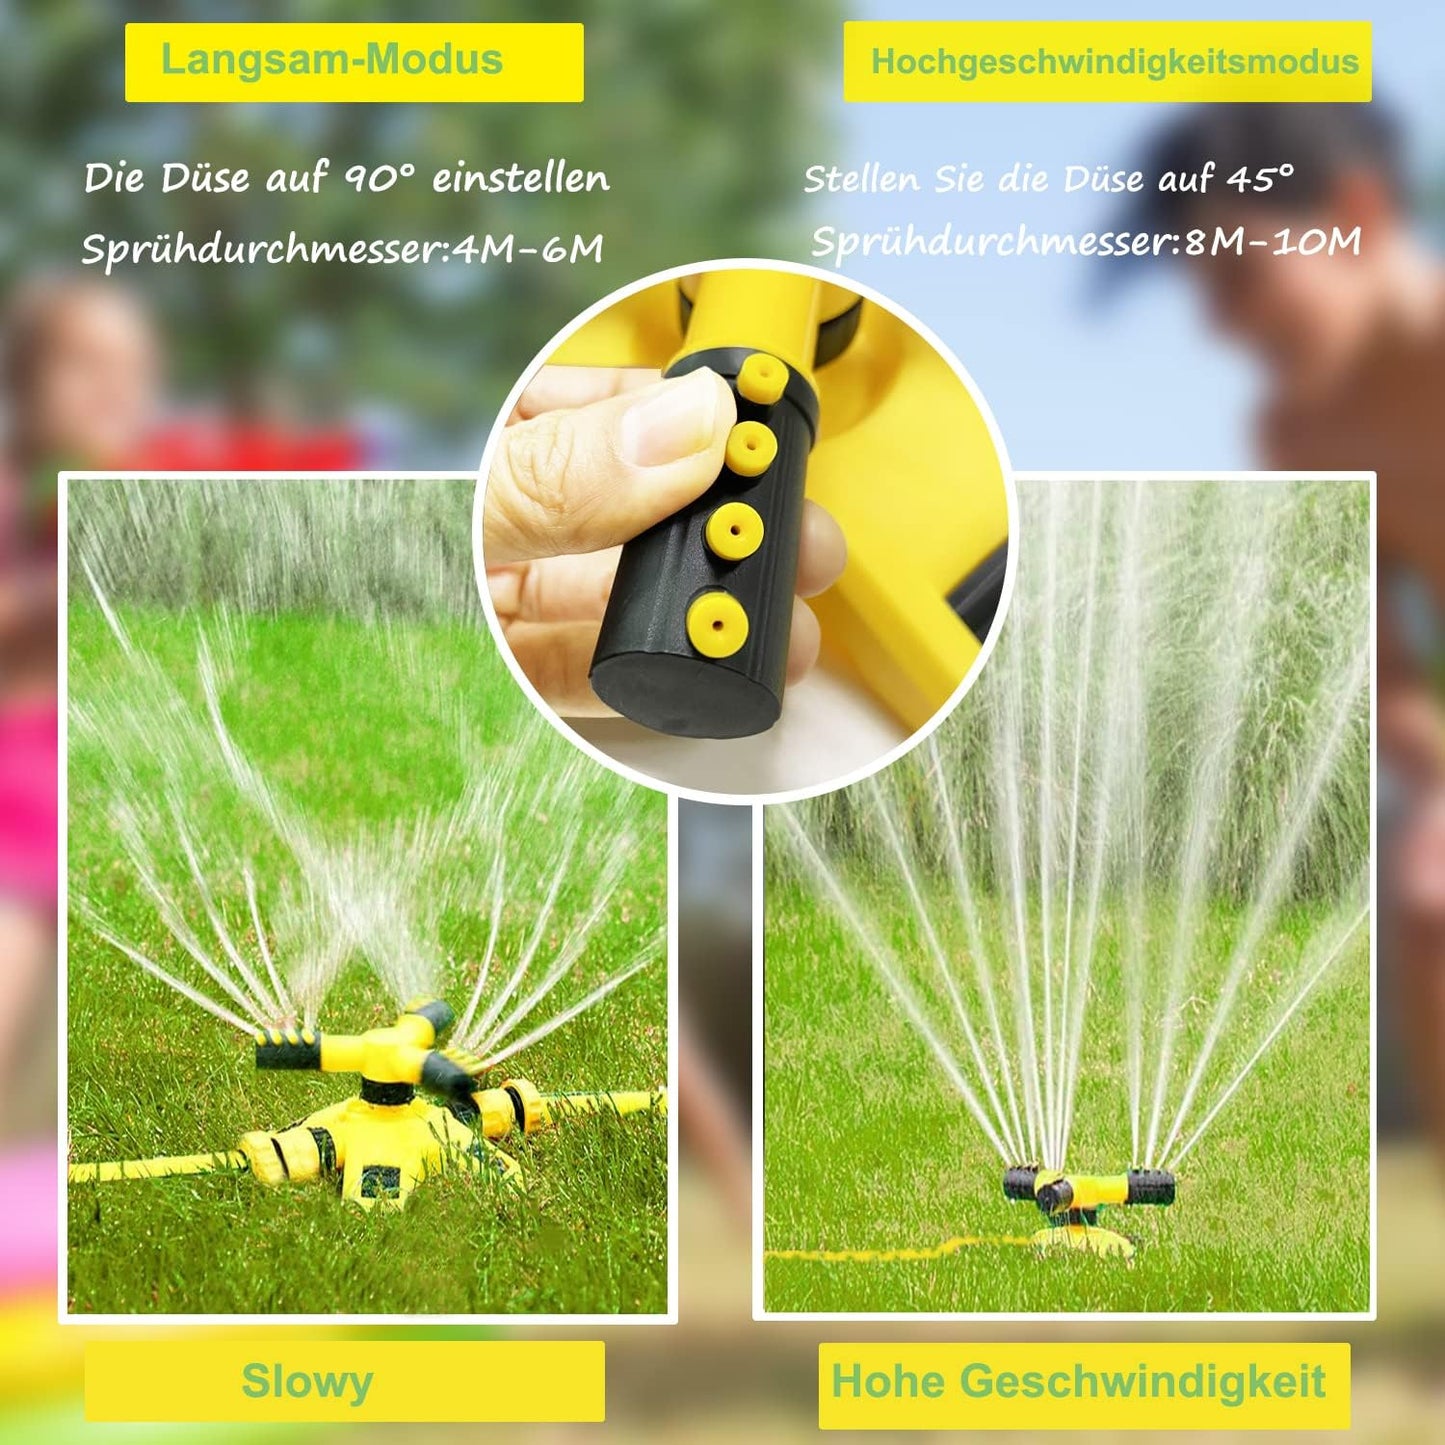 Water Sprinkler for Kids and Toddlers,Summer Yard Outdoor Water Play Toys with Rotating Spray Nozzles,Outside Splashing Lawn Game for Kids Ages 3 4 5 6 7 8 Boys Girls Pets,Attaches to Garden Hose